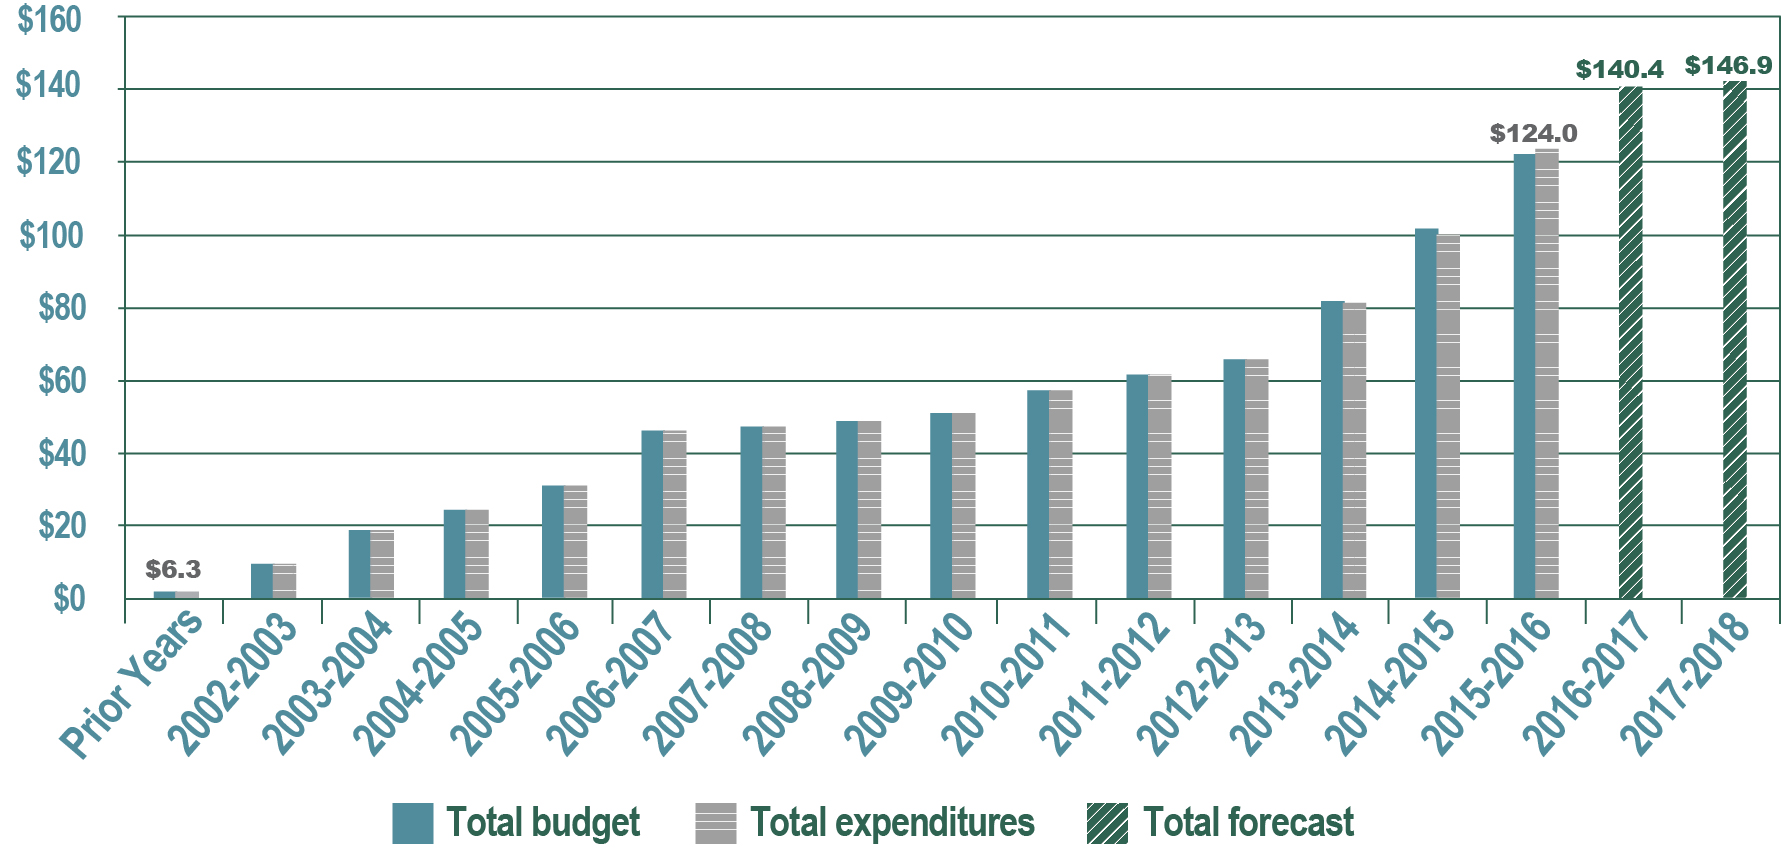 Figure 15—Long Term Vision and Plan Building Components and Connectivity program cumulative expenditures, forecasts and budgets—Fiscal year 2015 to 2016 (in millions of dollars) - See description below.